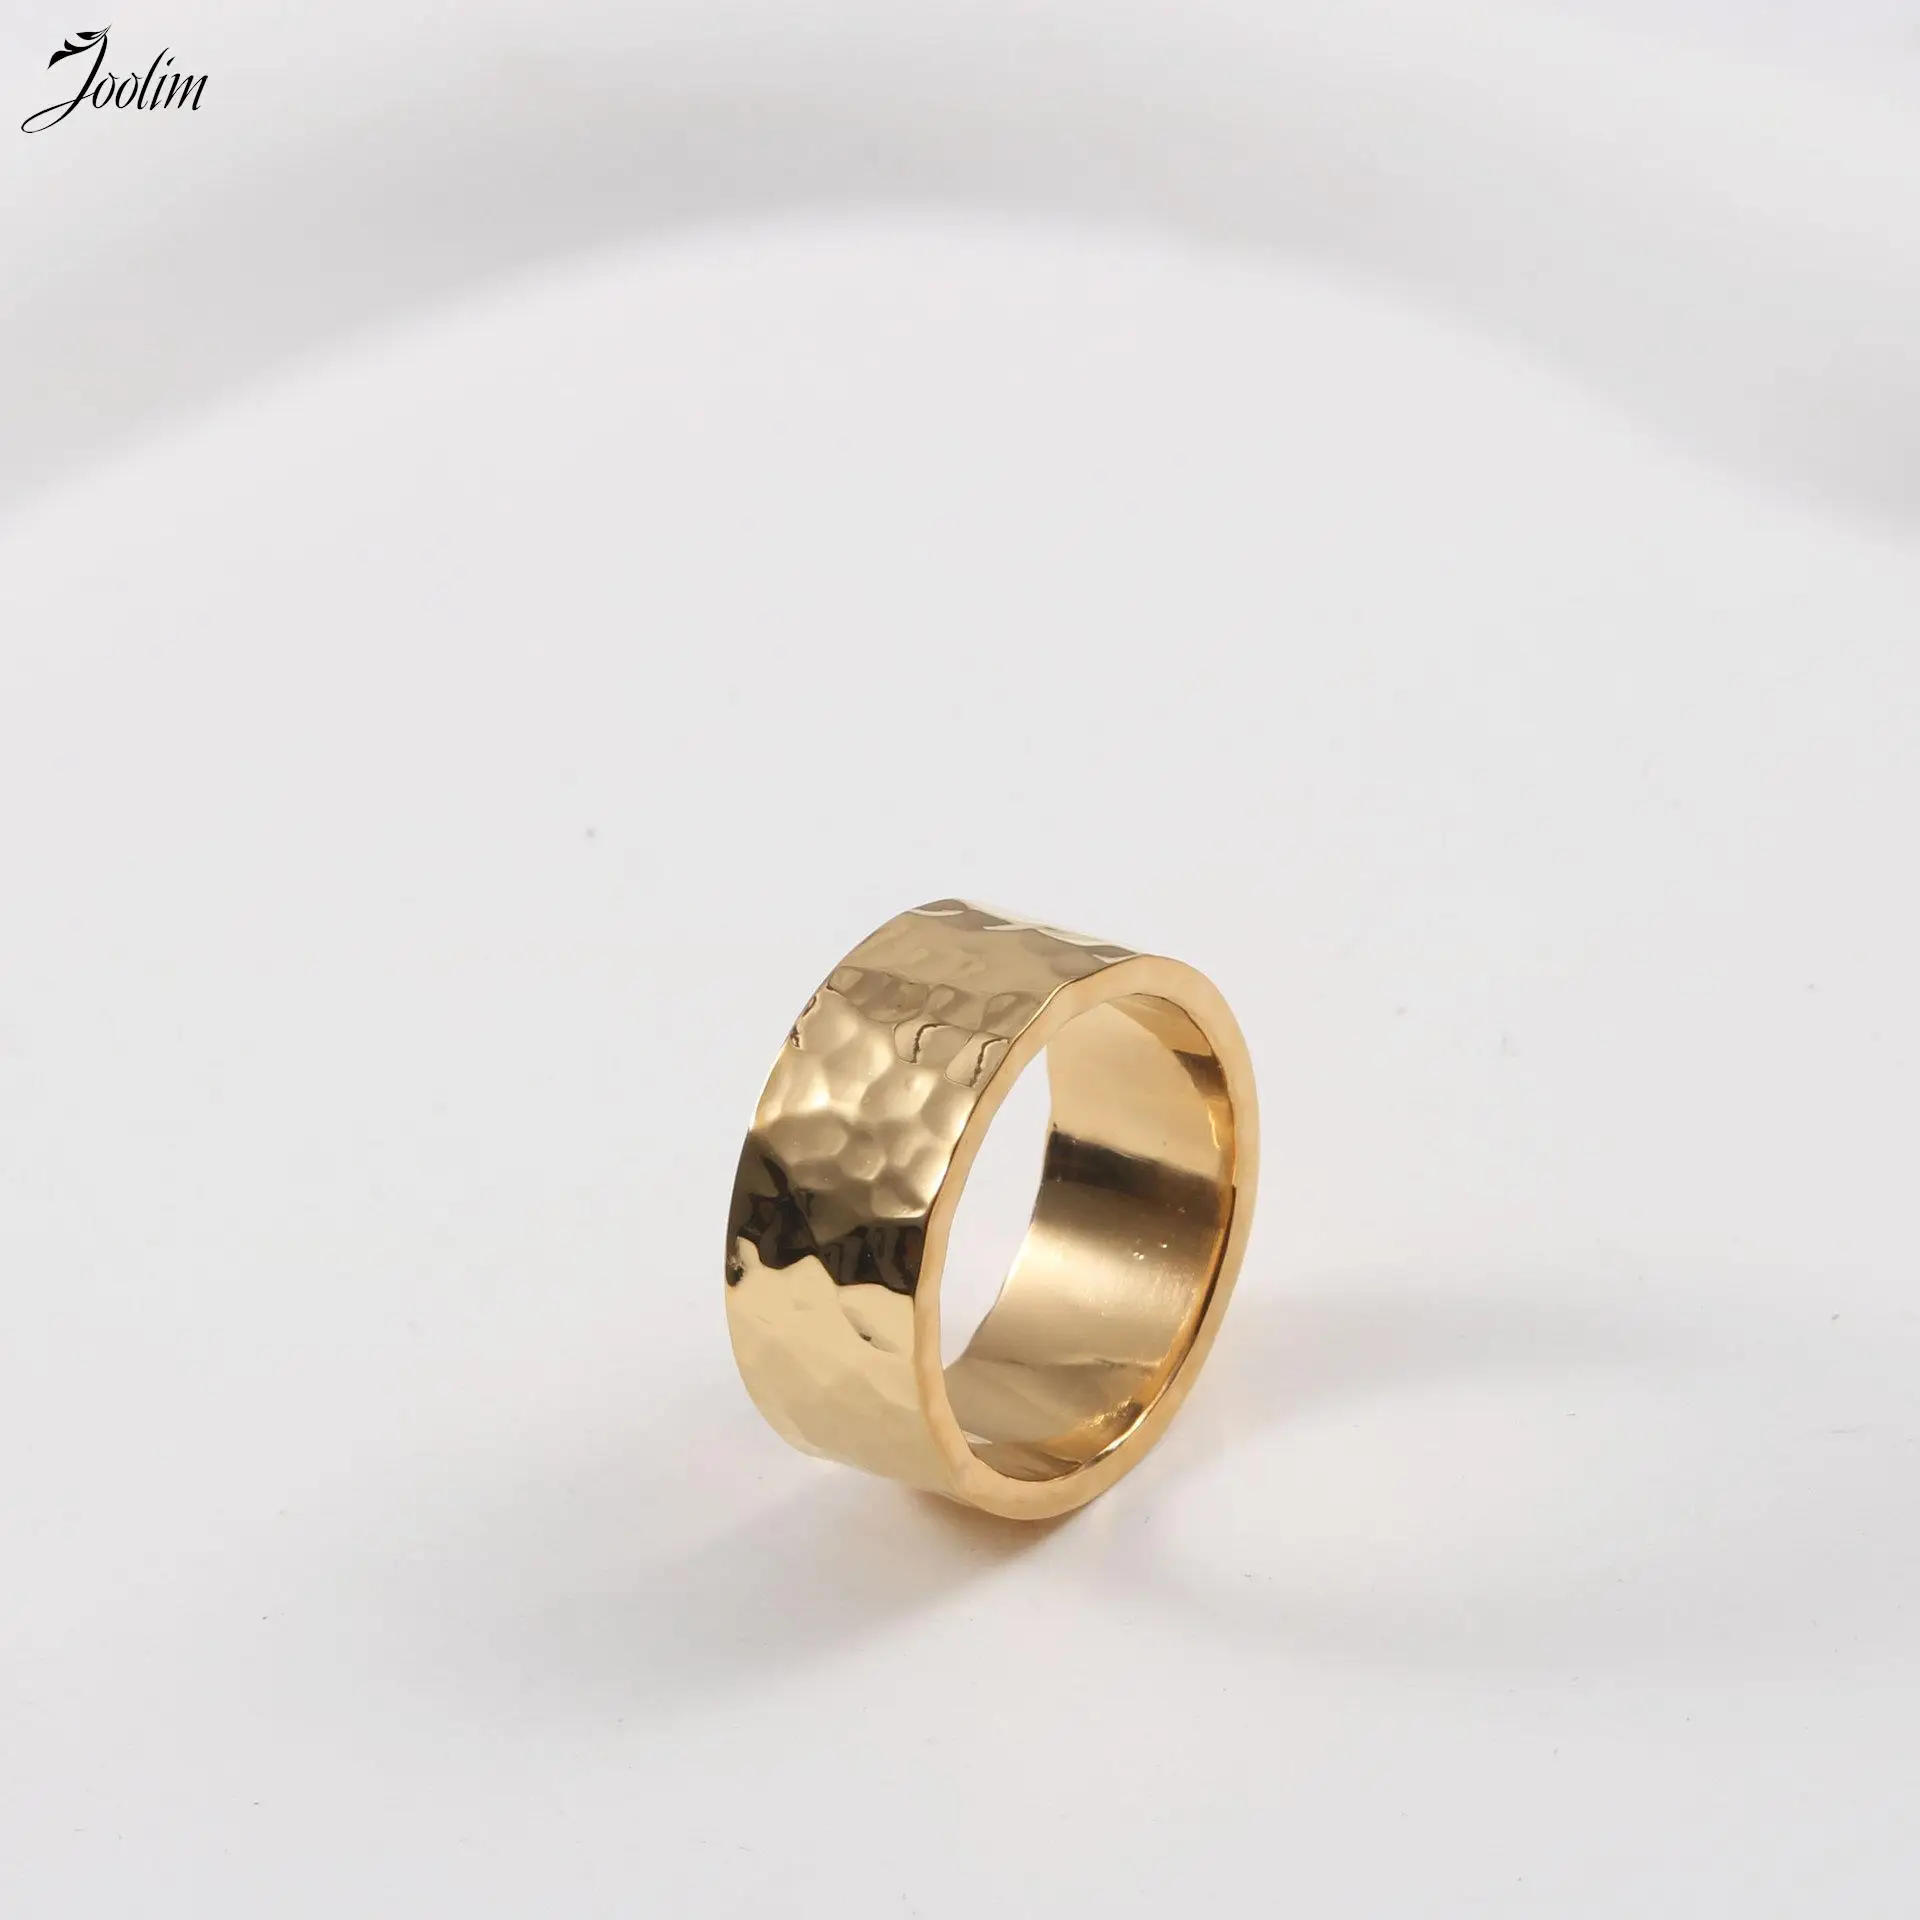 

Joolim High End Gold Finish Tarnish Free Permanent Hand-made Hammer Rings 18K pvd Plated Stainless Steel Jewelry Wholesale